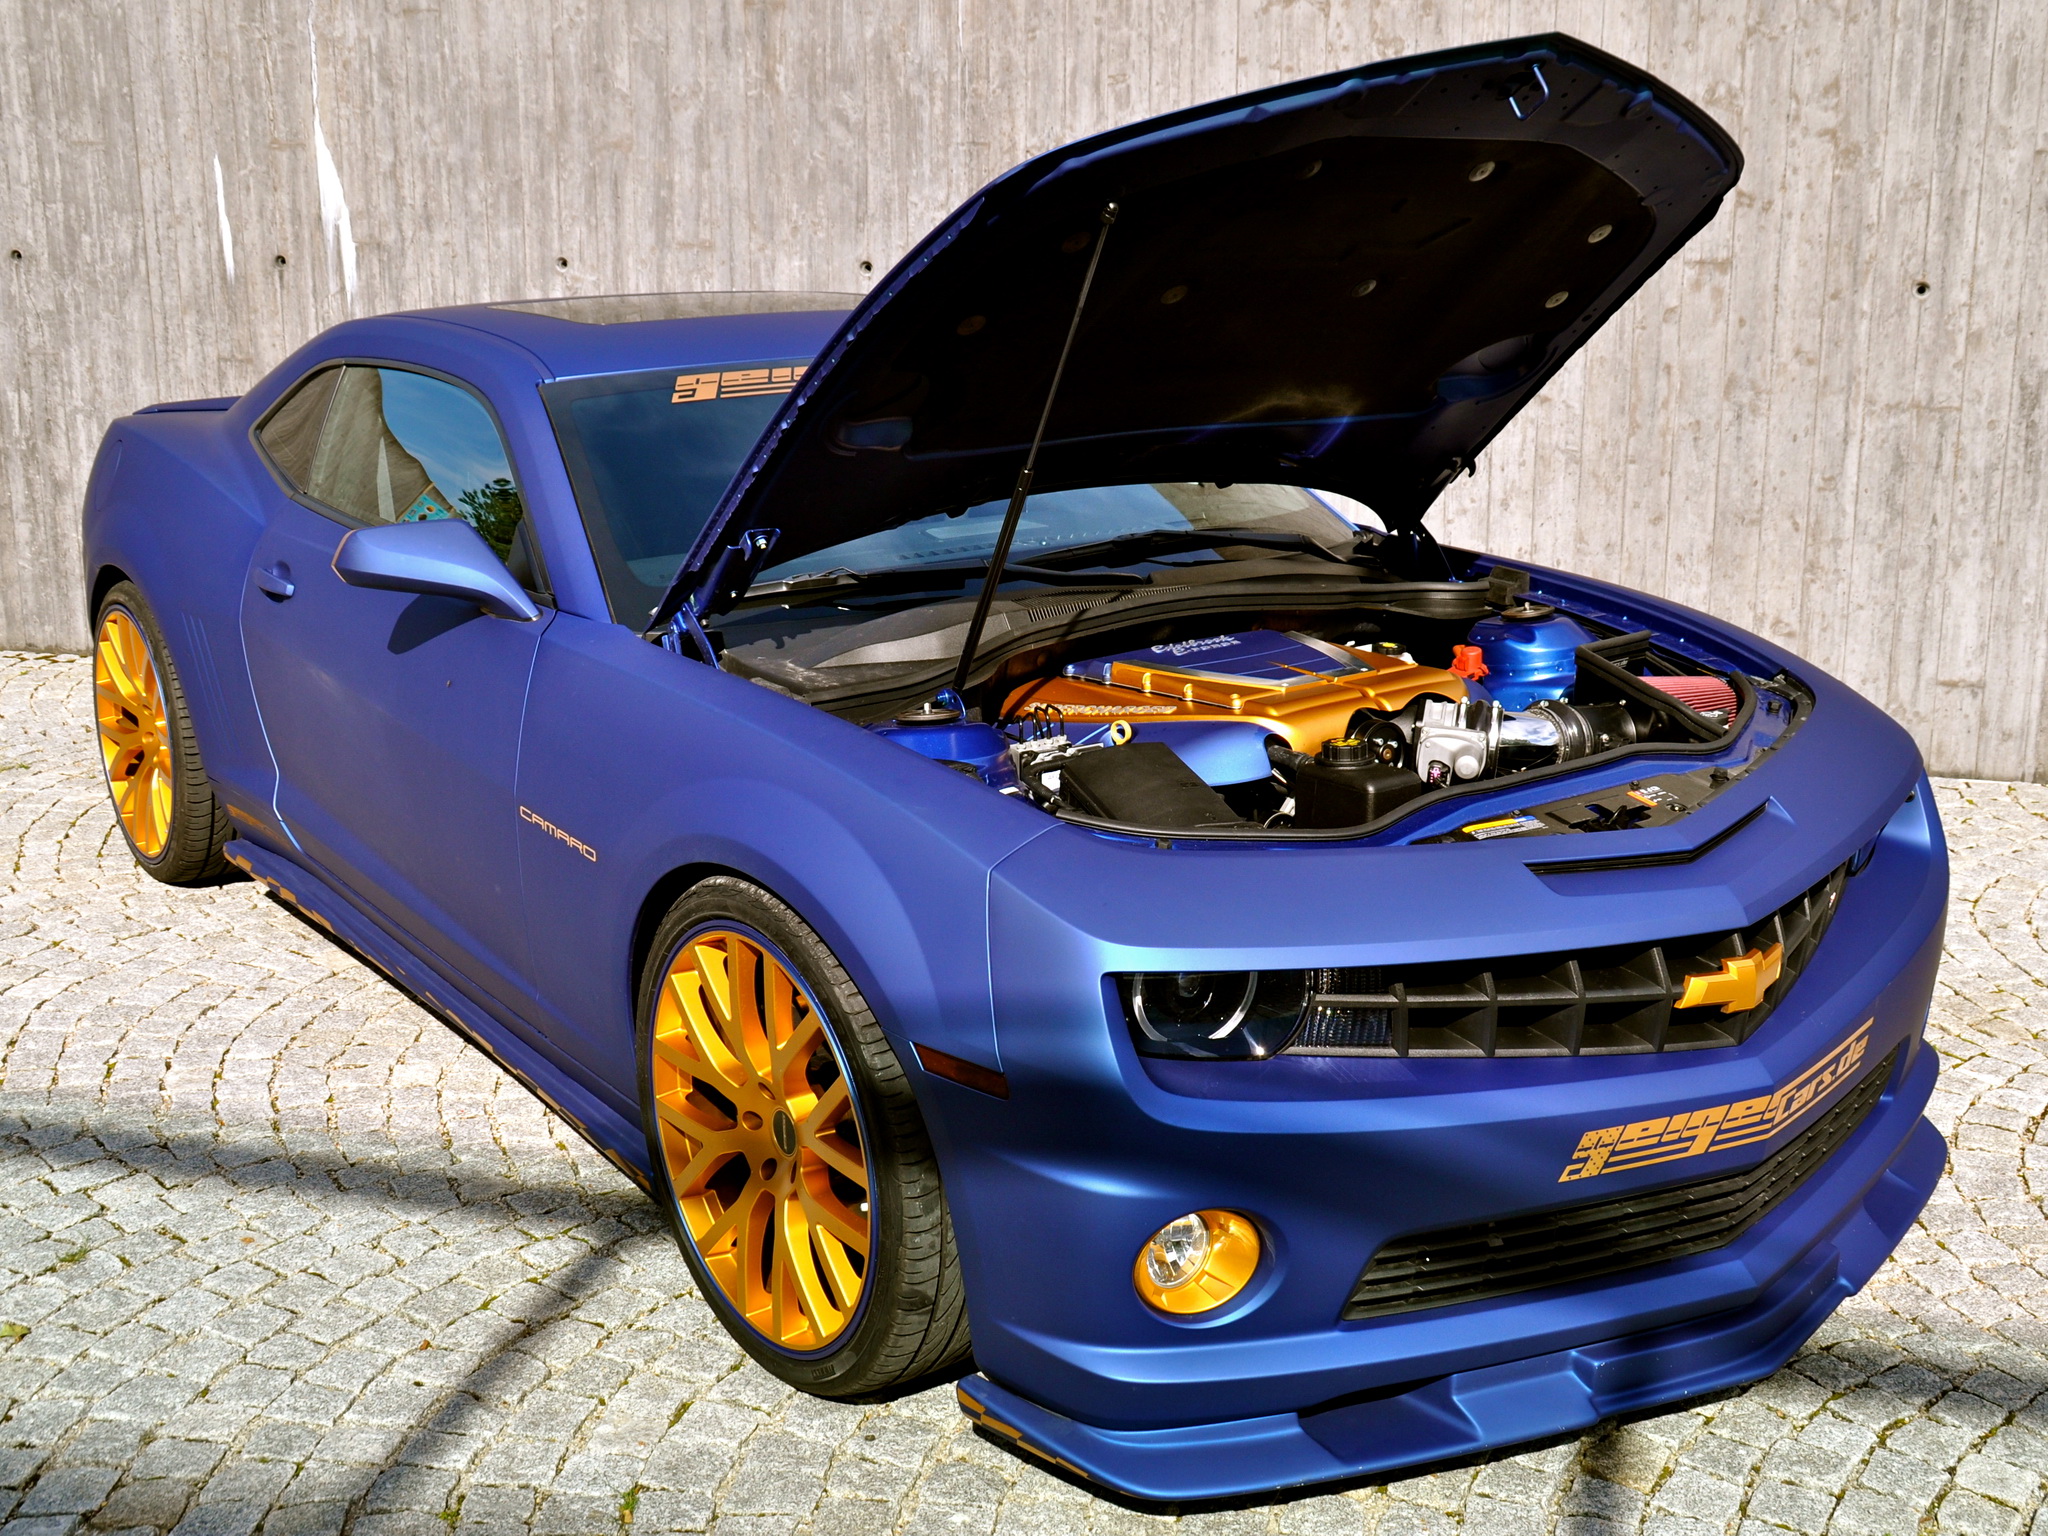 2011, Geiger, Chevrolet, Camaro, Ss, Muscle, Tuning, S s, Engine Wallpaper